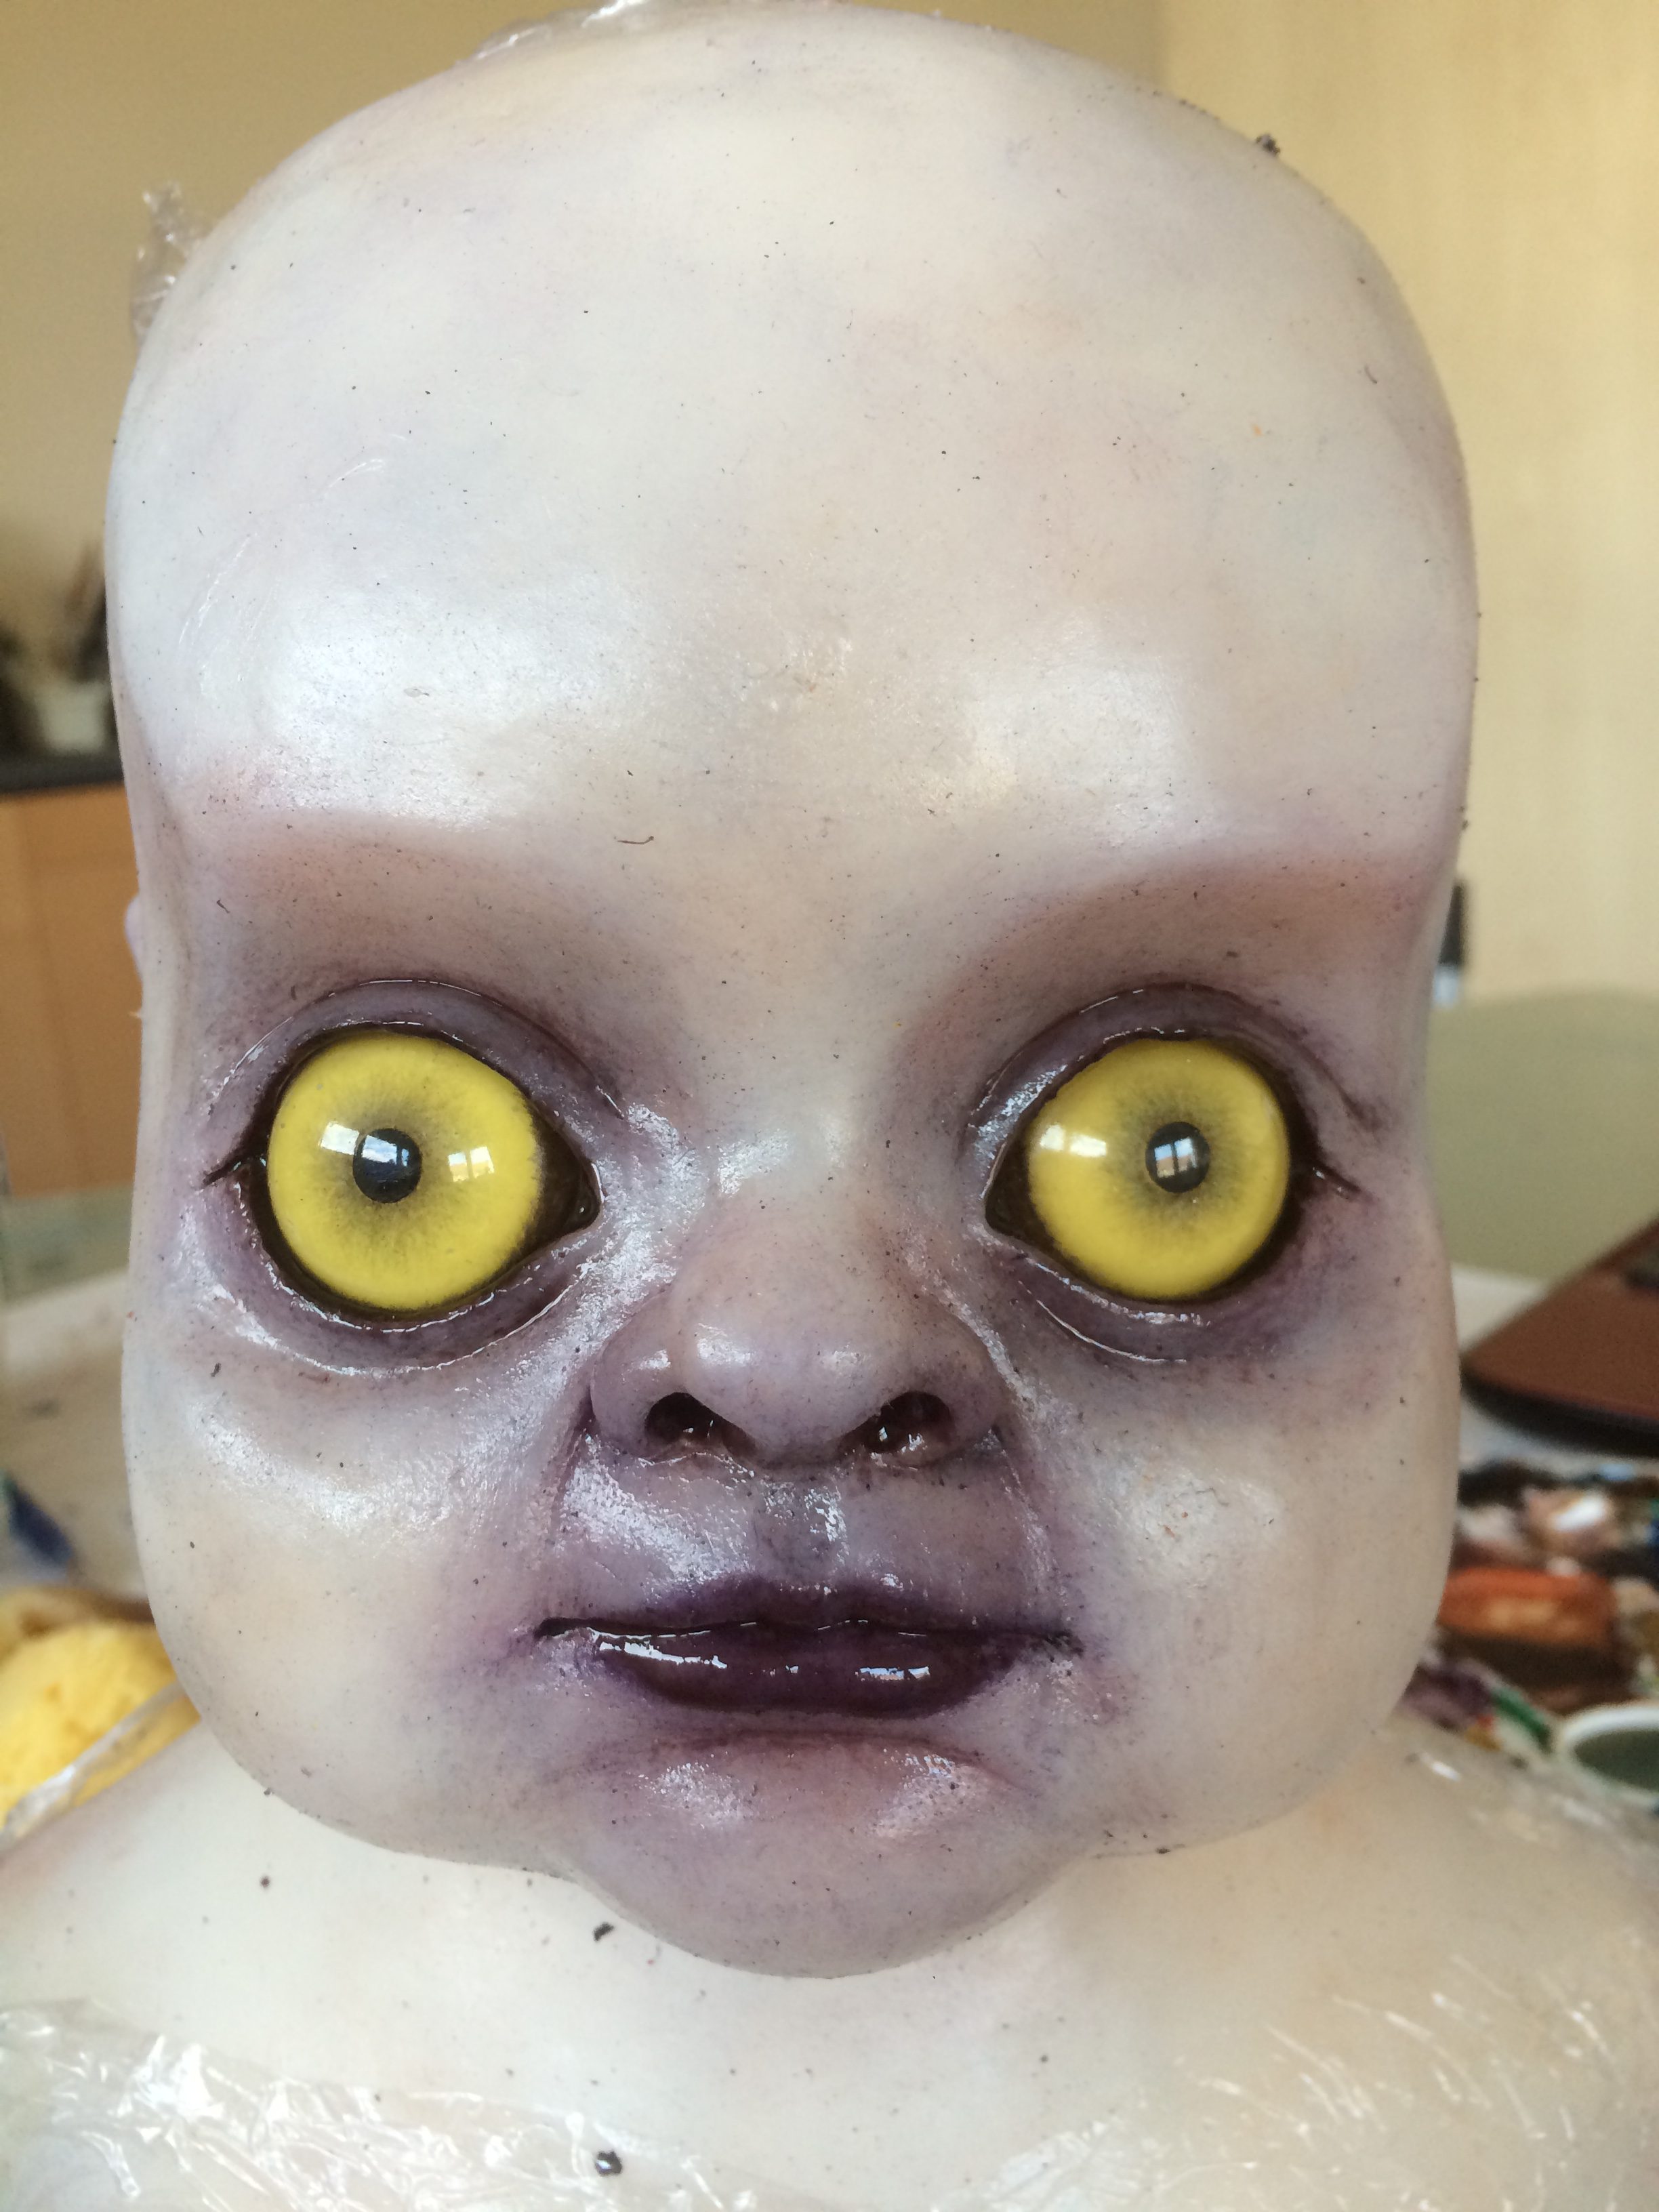 Baby facial features fully painted